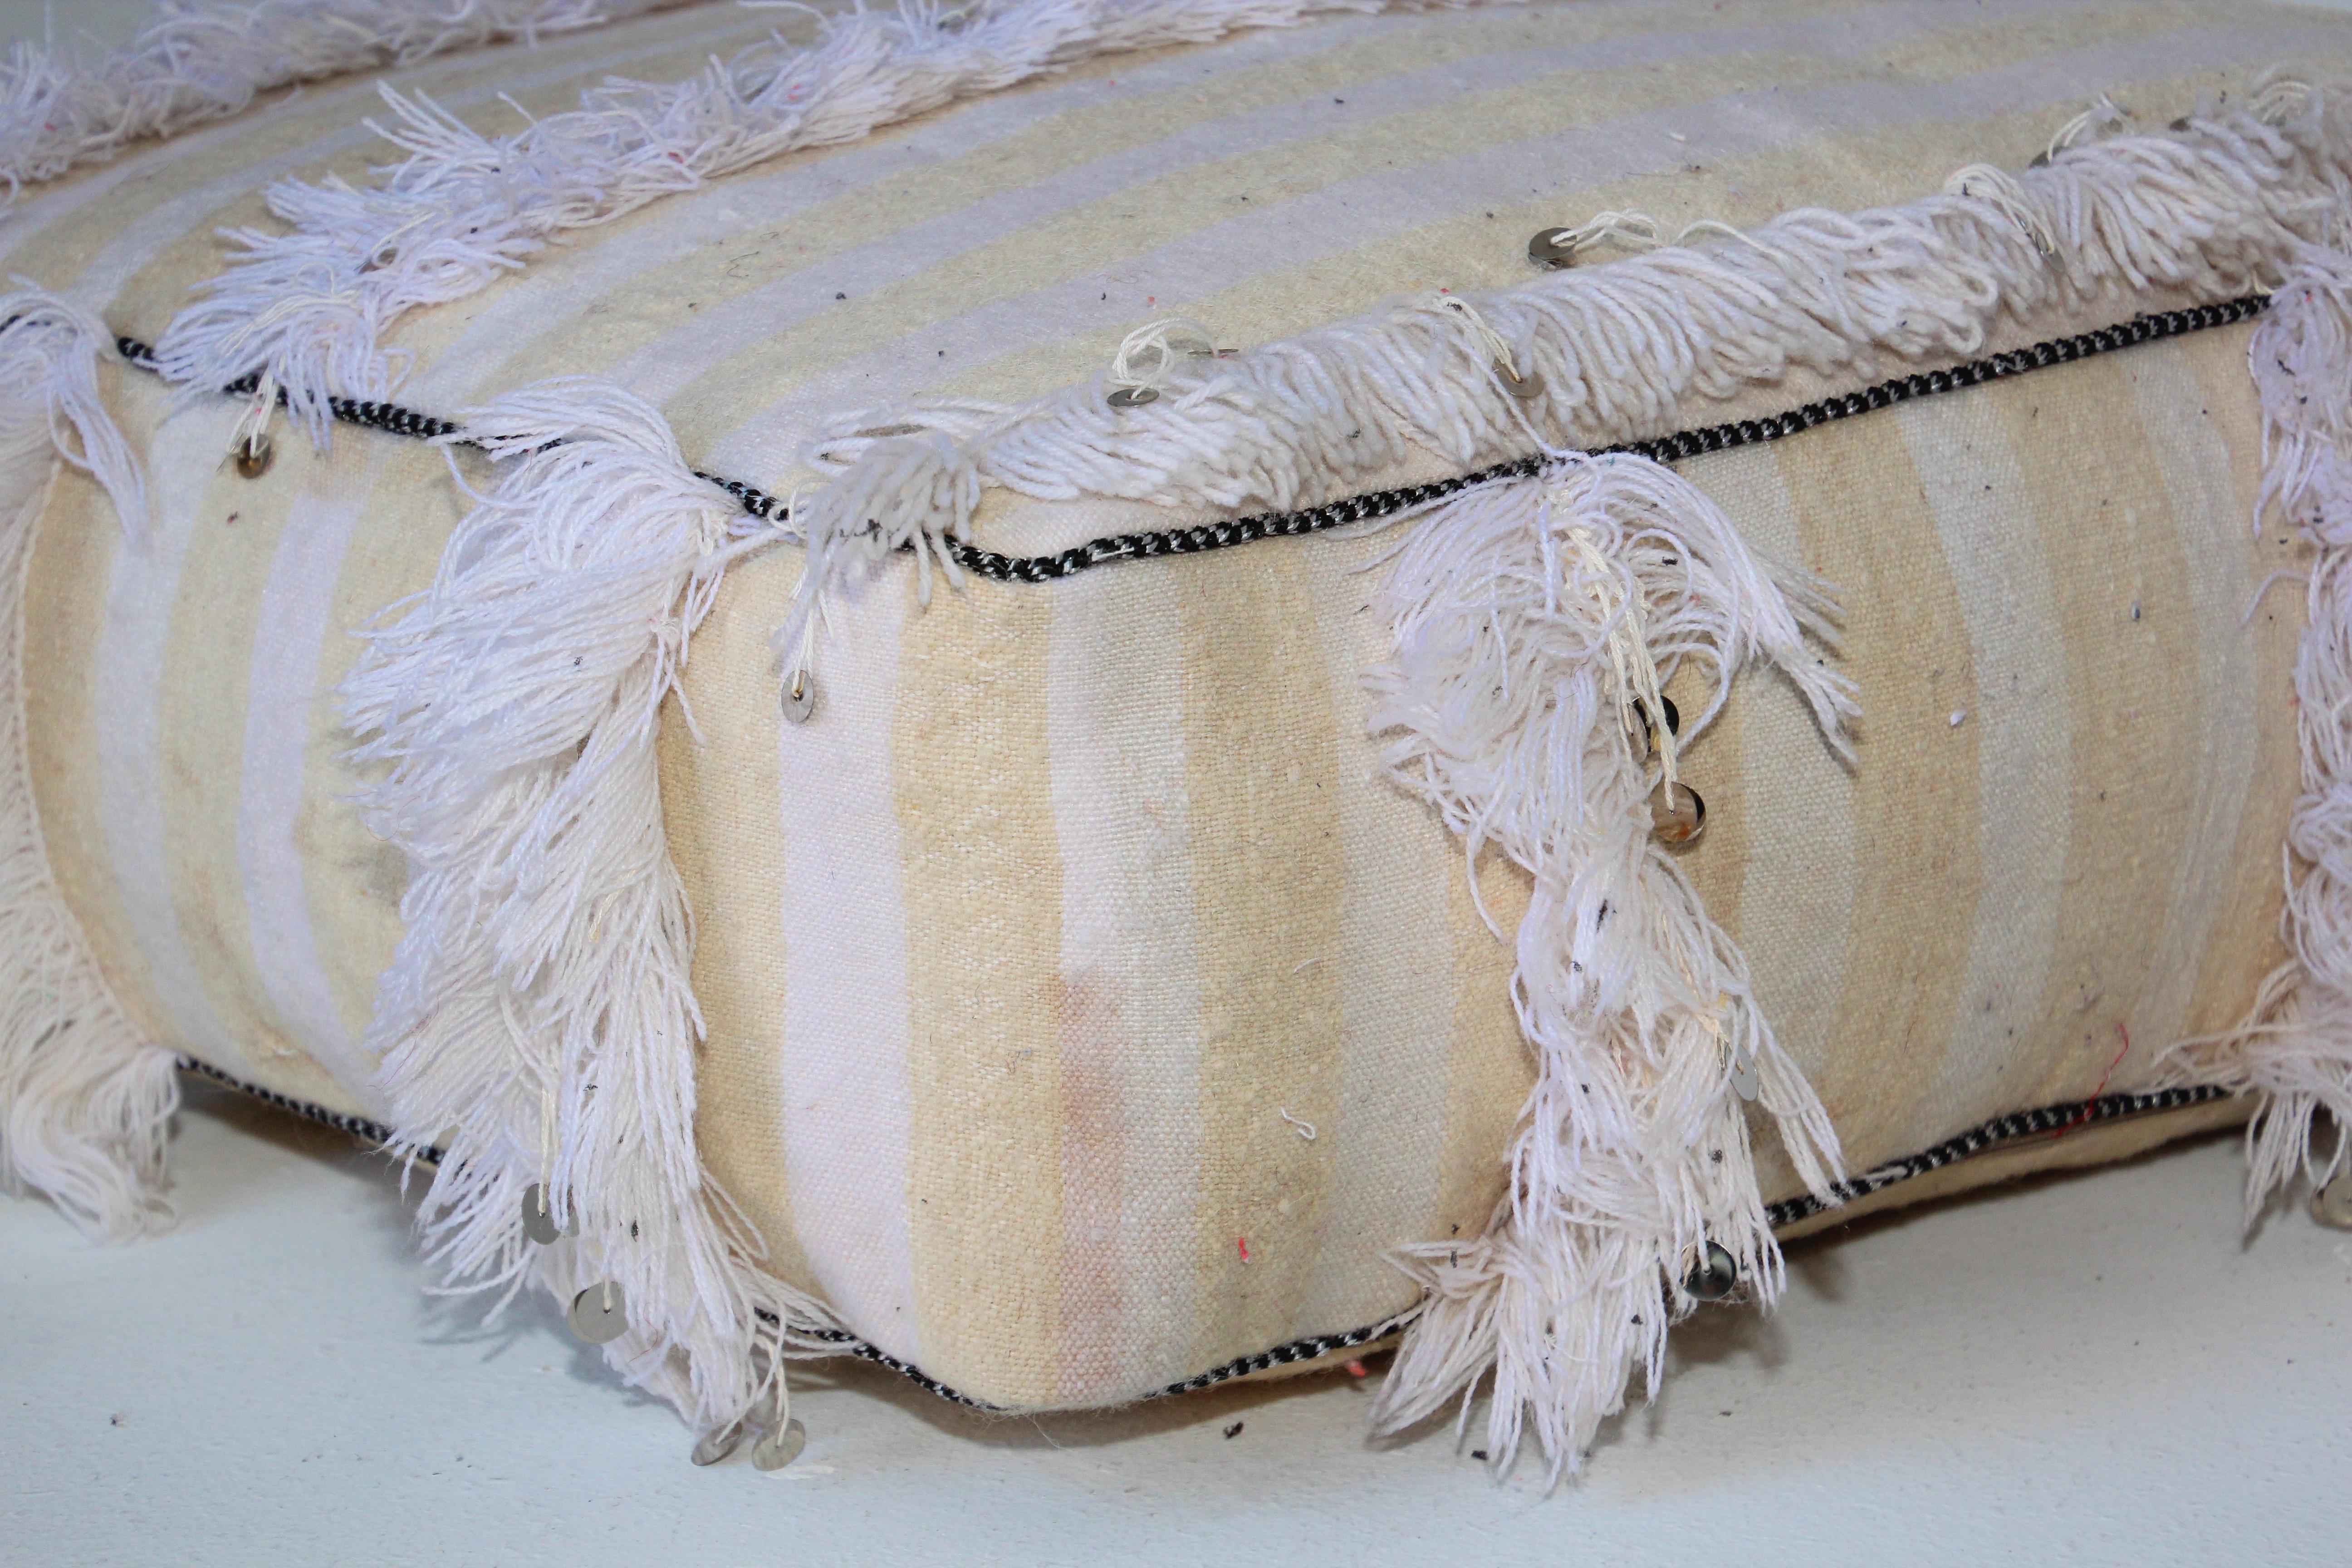 Moroccan floor pillow bohemian pouf with silver sequins and long fringes.
This handcrafted vintage Moroccan boho tribal floor pillow or pouf is made from a traditional handwoven white wool and cotton throw used by the Berber women in Morocco for